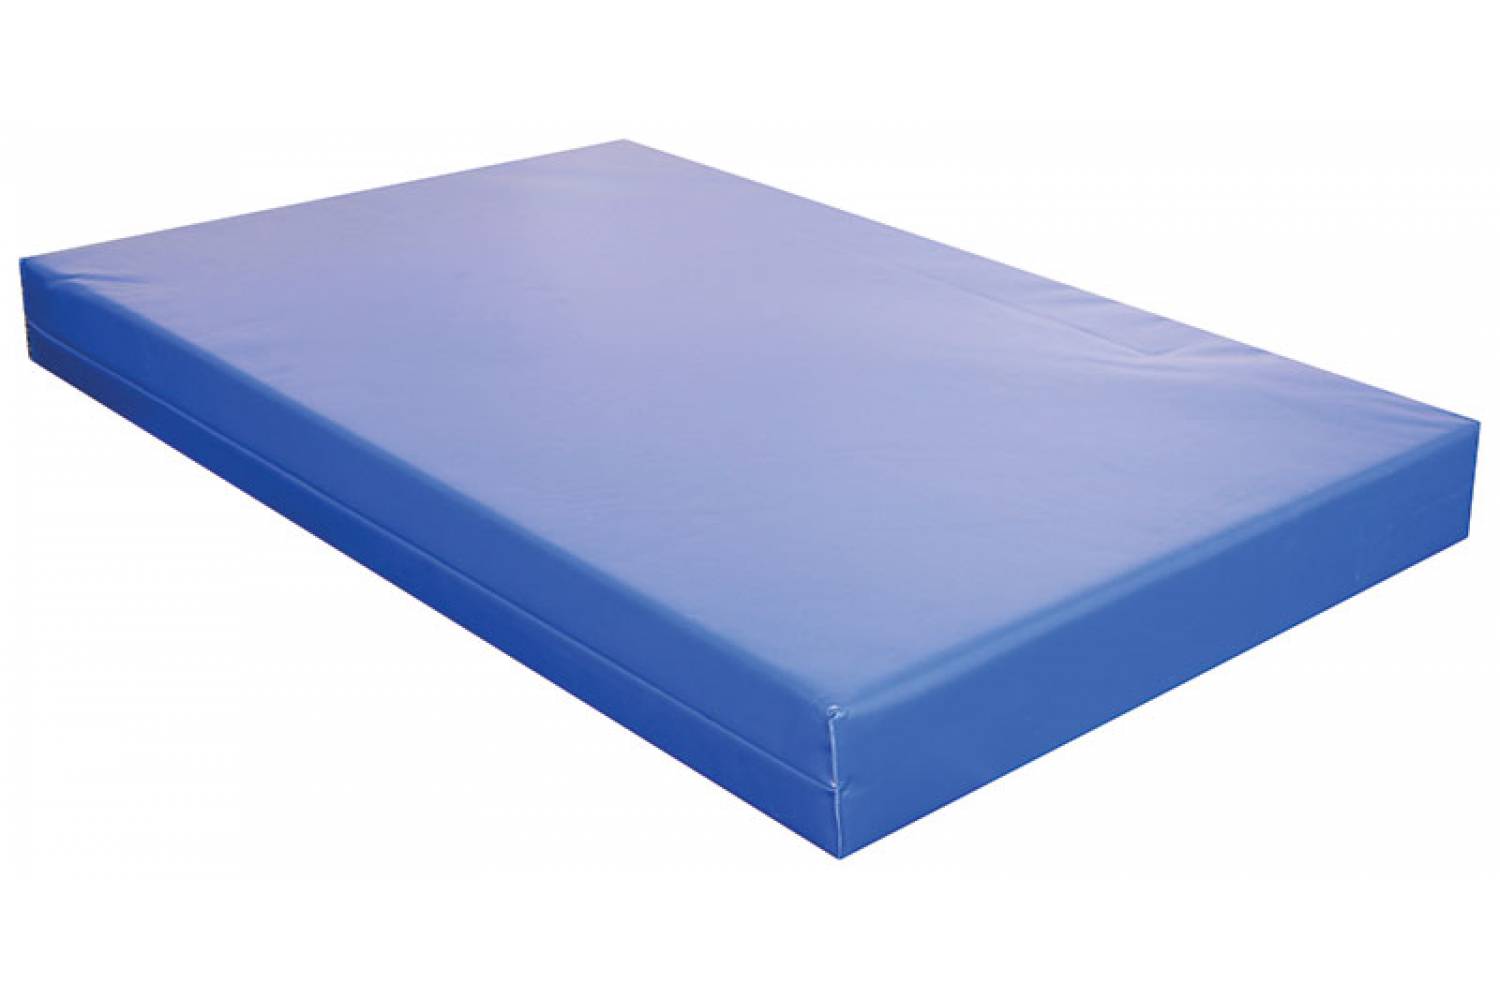 cheapest place to get waterproof mattress pads